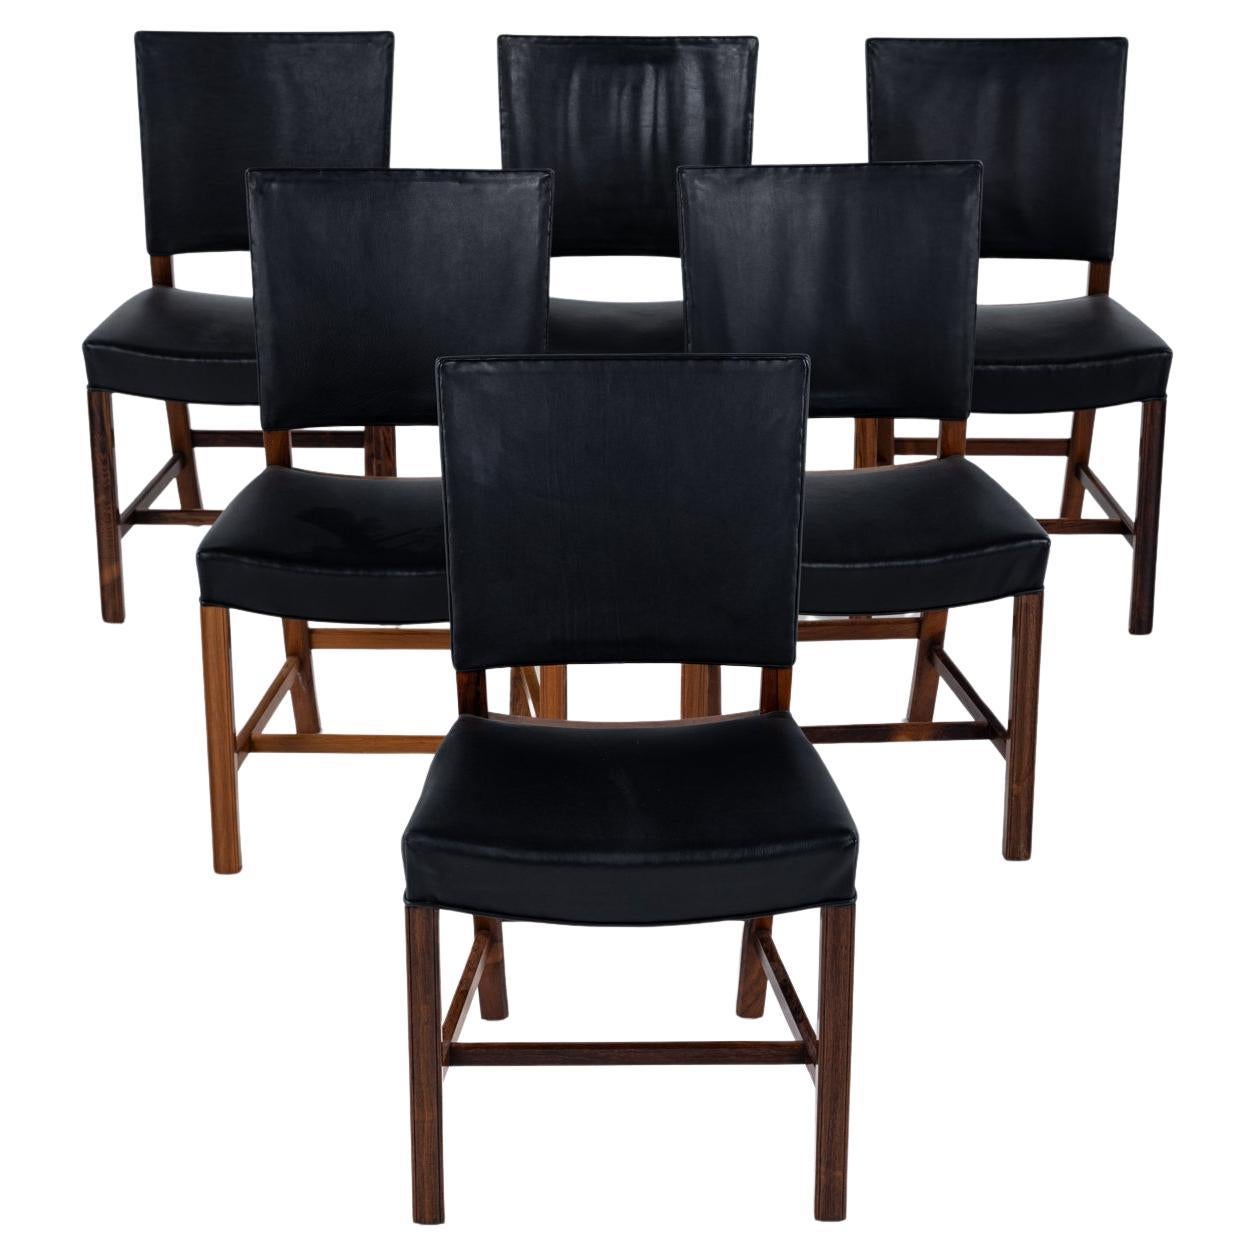 A very rare set of Rio rosewood Barcelona chairs by Kaare Klint